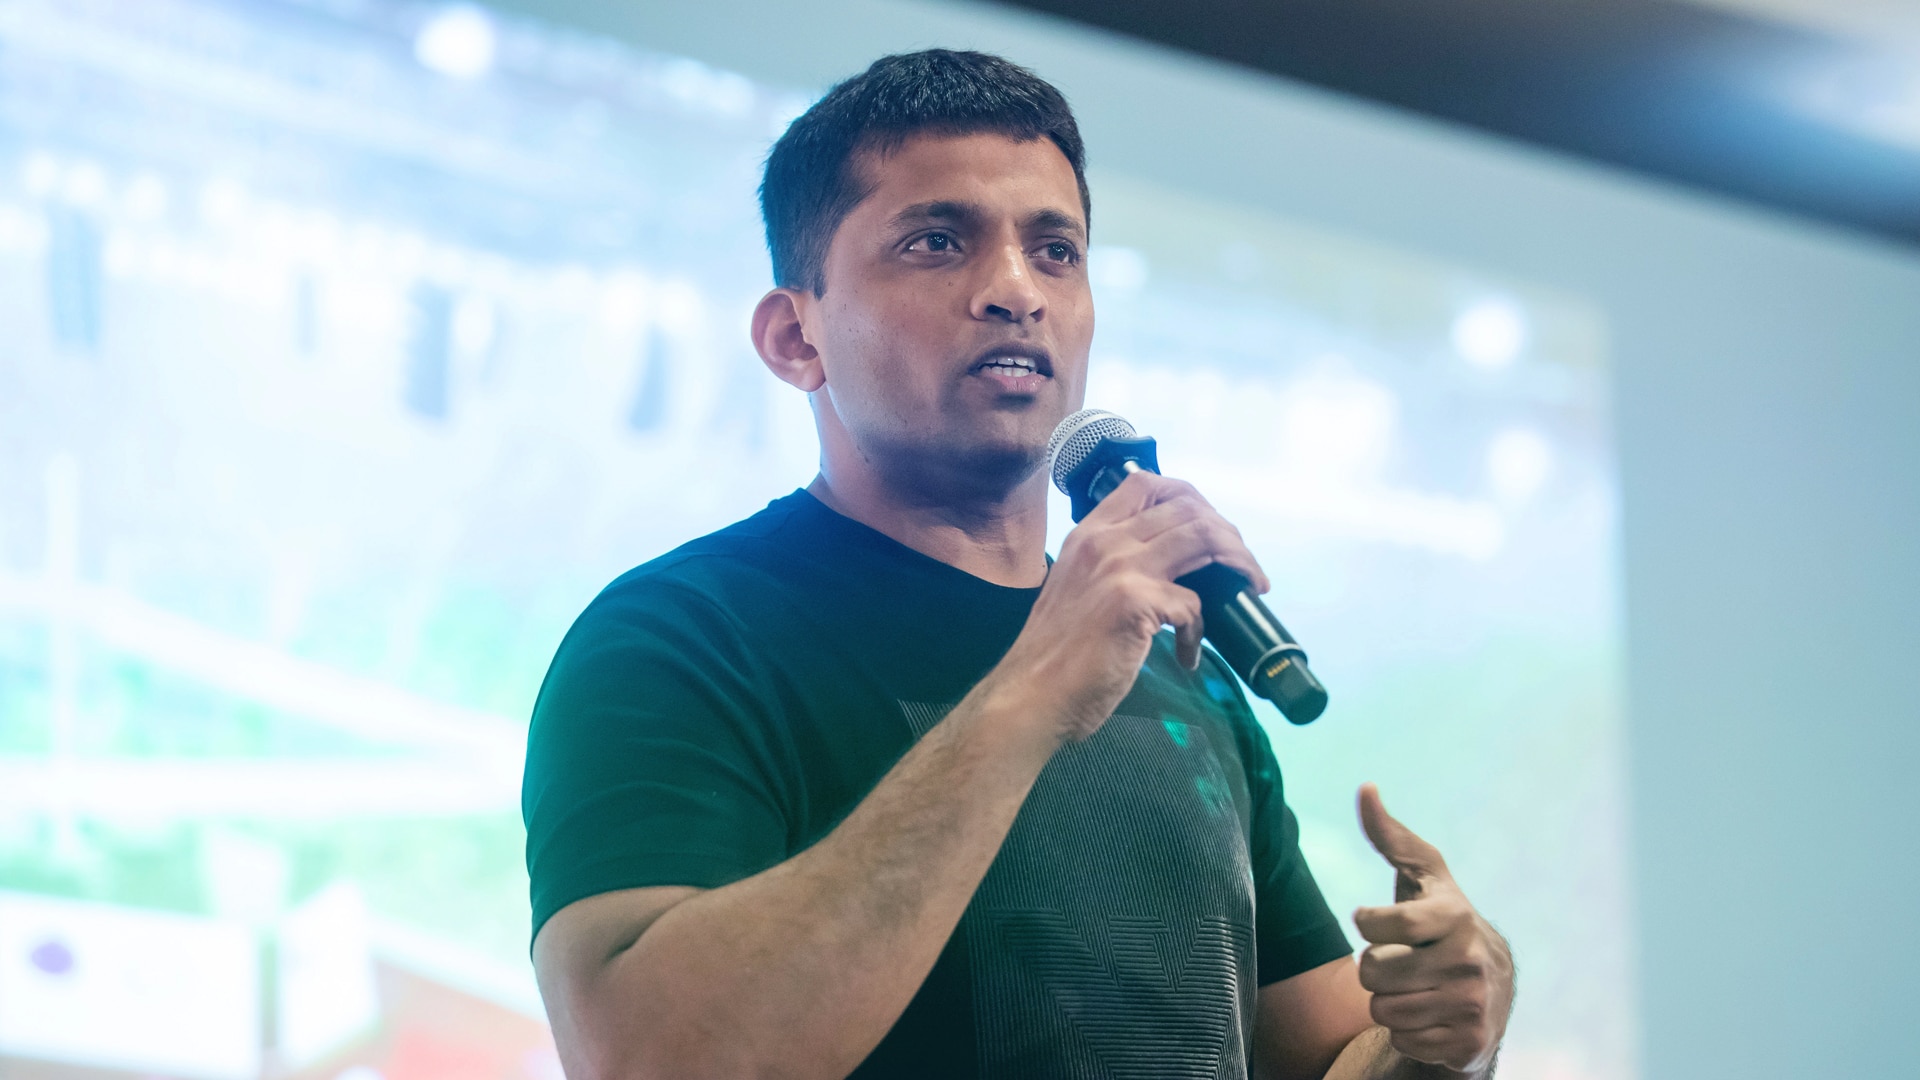 ICAI looking into financial disclosures of Byju's, says President Debashis Mitra